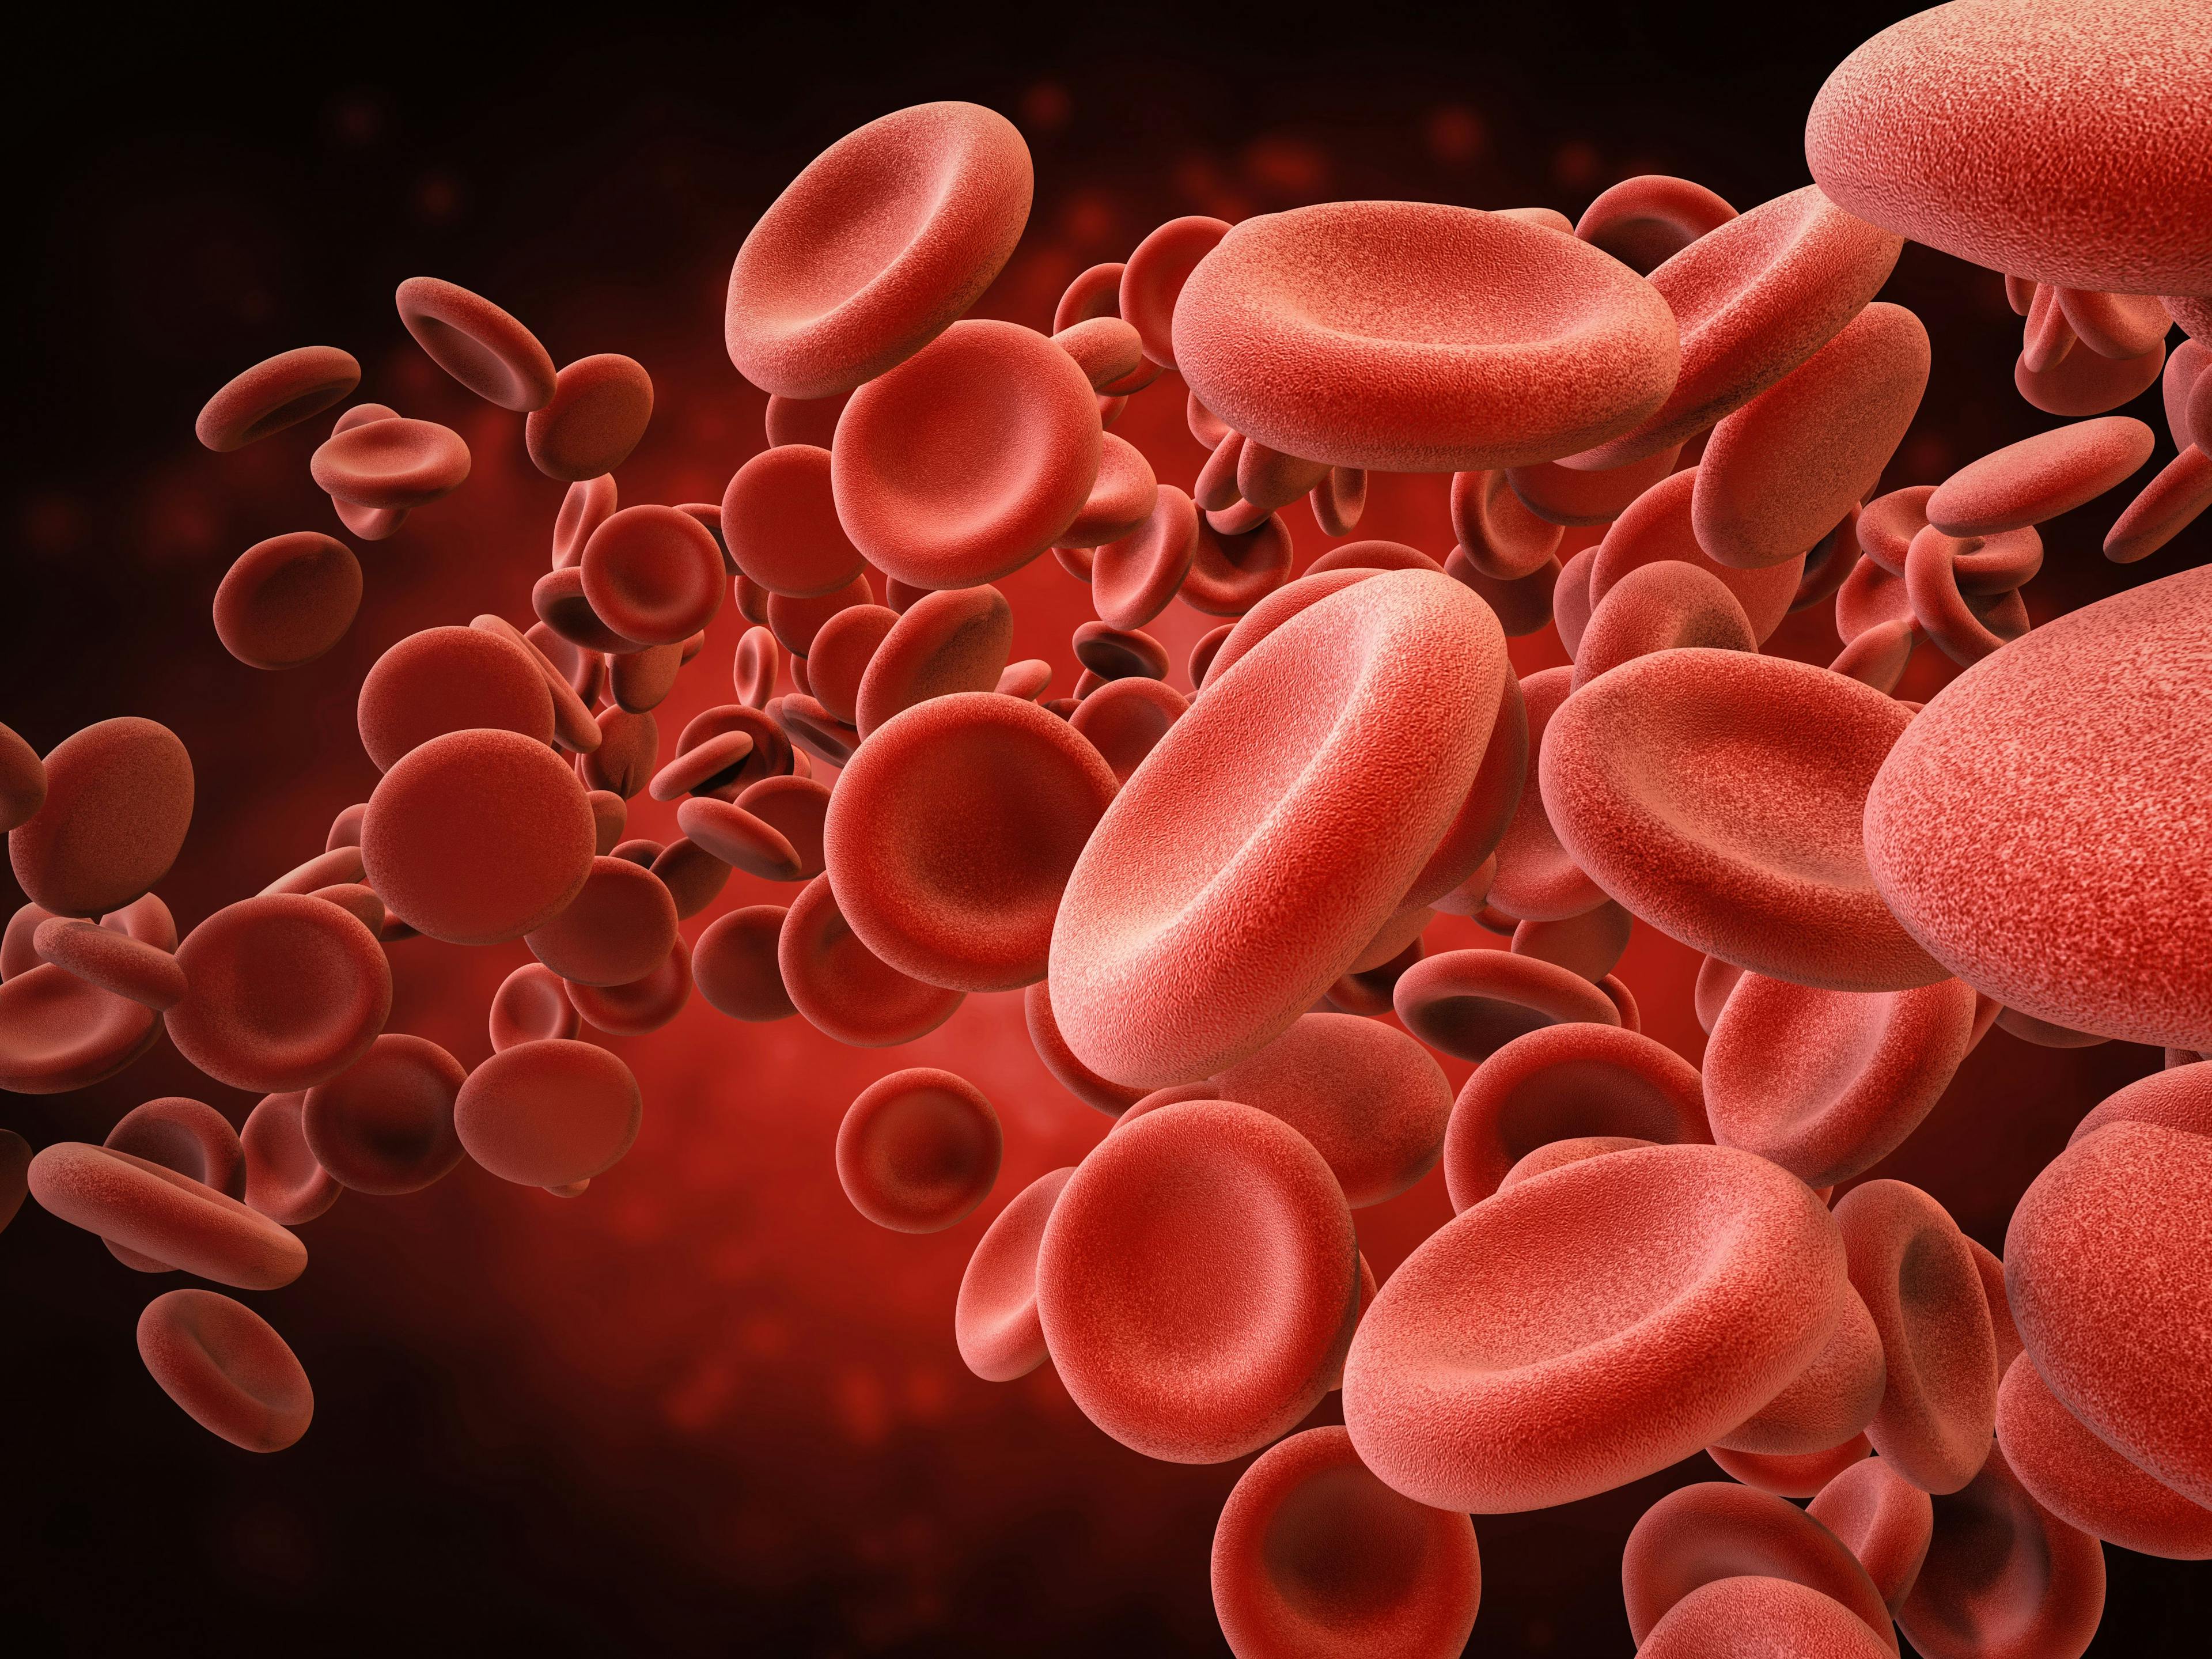 Hemgenix Approval May Pave Way for Val-Rox in Hemophilia A 